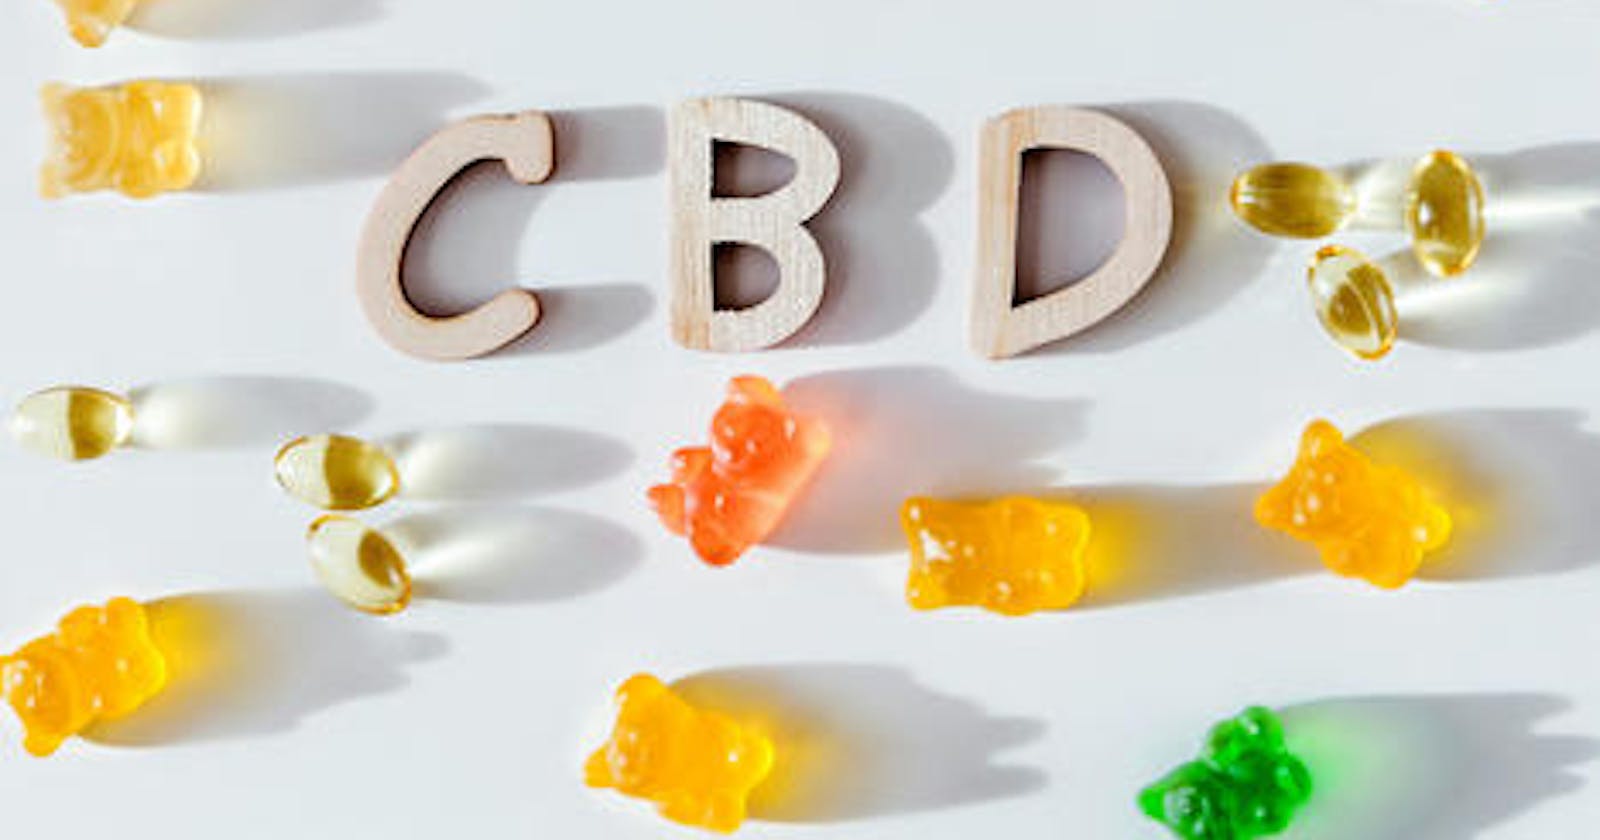 Peak Power CBD Gummies UK - [Scam or Legit]Pros,Cons,Side Effects And How It Works ?